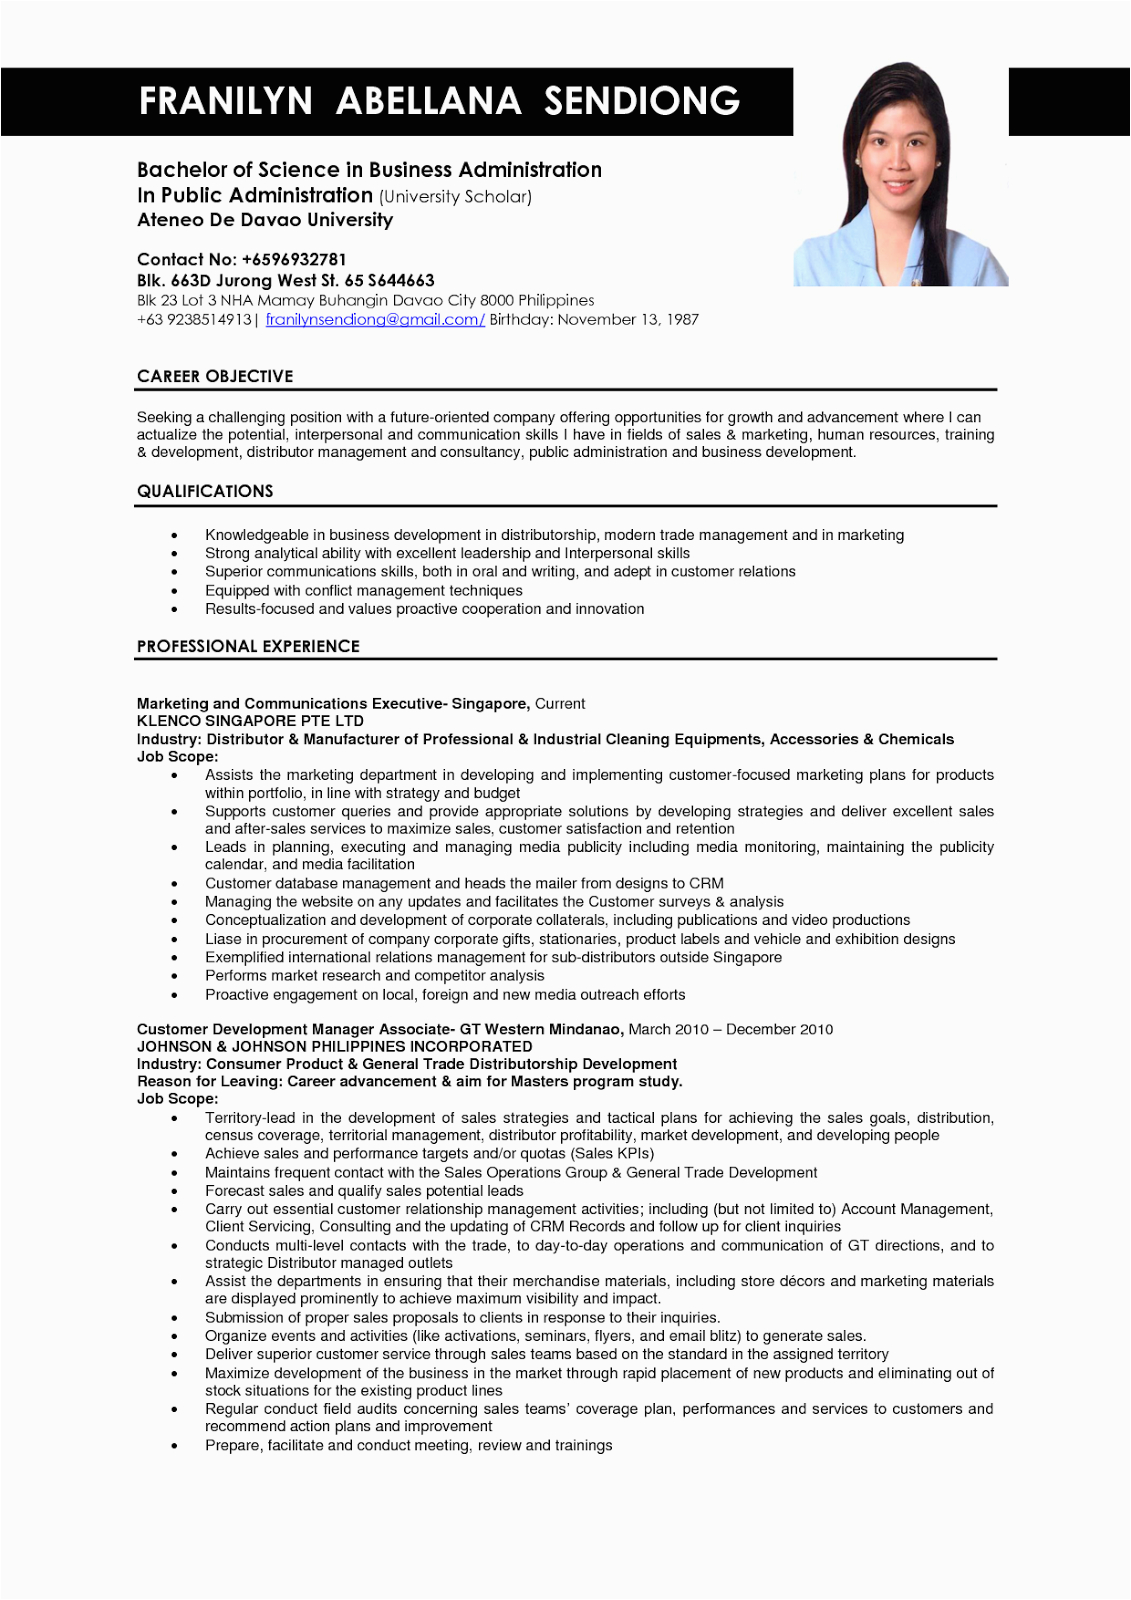 Resume Sample for Business Administration Student Business Administration Resume Samples